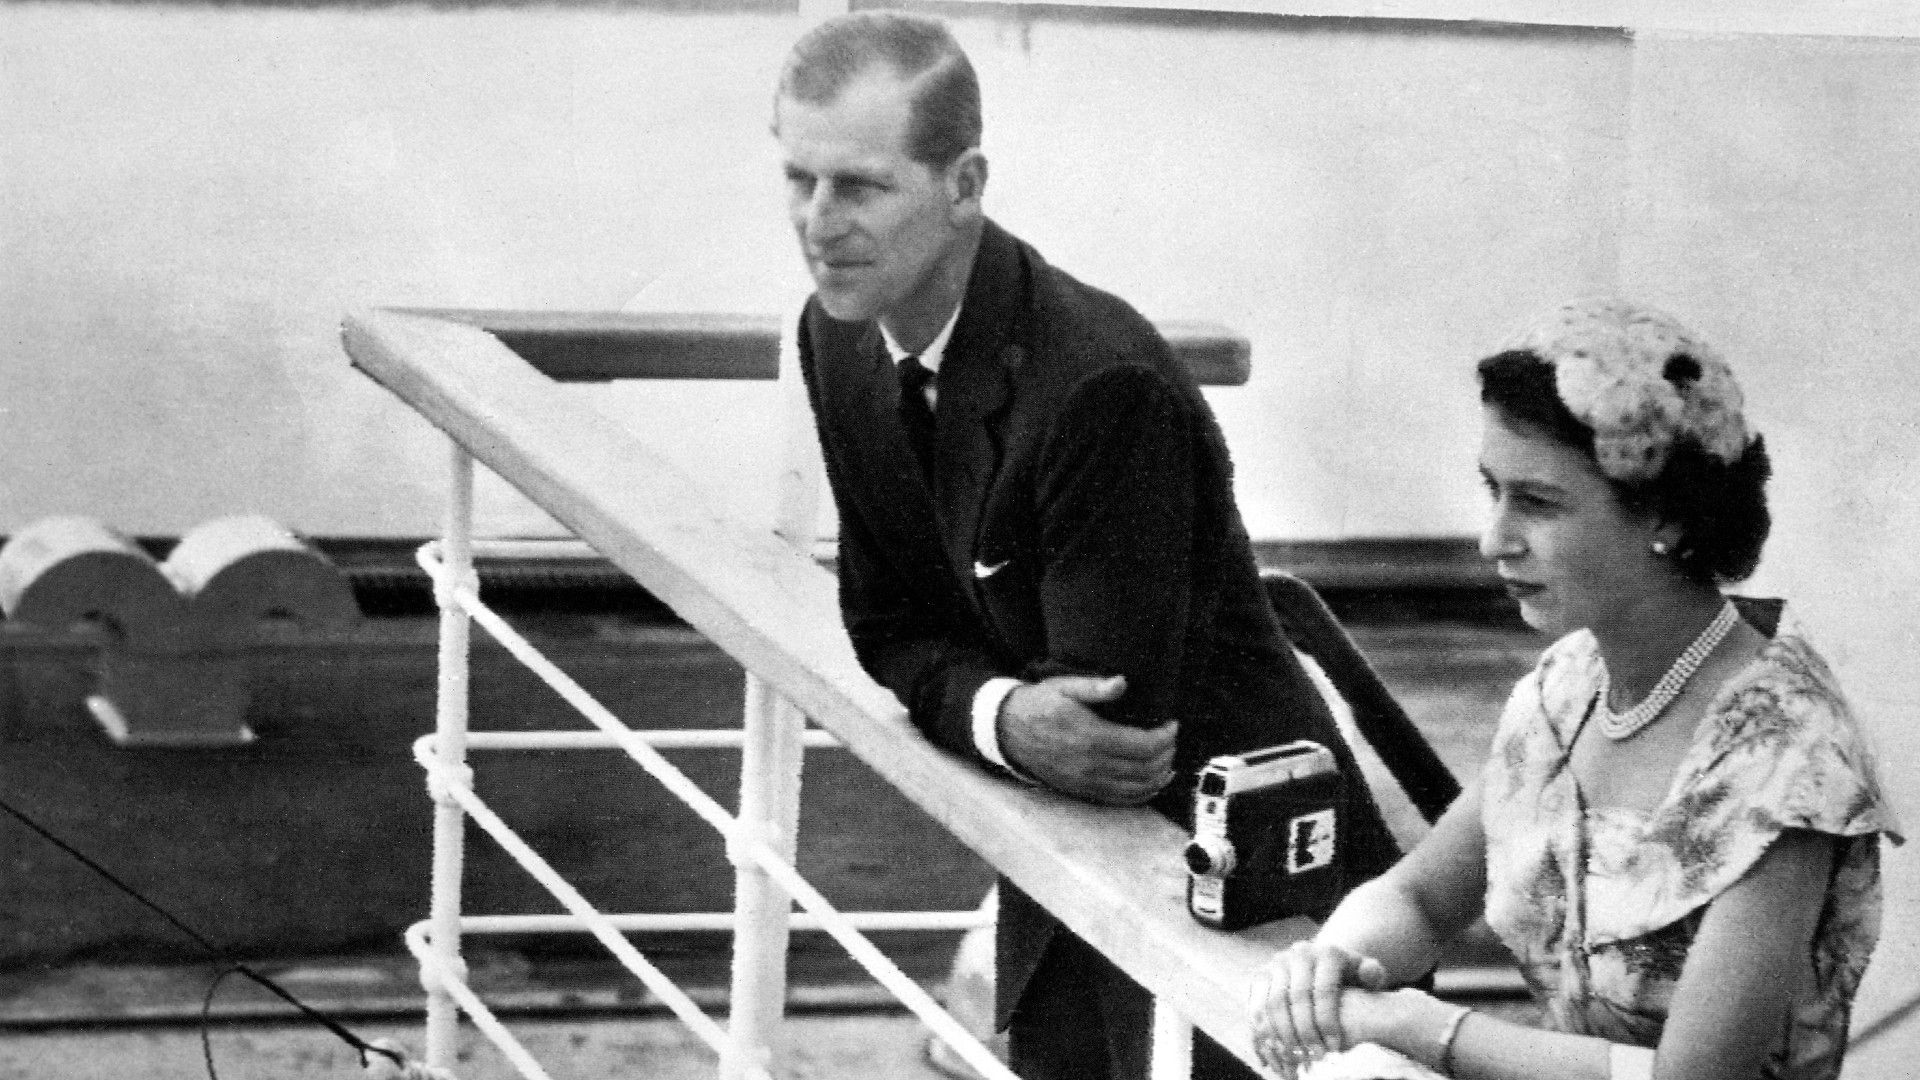 <p>                     One of the Queen's best royal tour moments was undoubtedly her biggest tour ever, which took place just a year after becoming monarch.                   </p>                                      <p>                     After her coronation in 1952, the Queen and Prince Philip embarked on a mammoth tour of all of the Commonwealth nations at that time, which took place across six months between November 1953 to May 1954. In that time, the monarch and her husband visited countless different places within the West Indies, Australasia, Asia and Africa, and covered an enormous 44,000 miles travelling.                   </p>